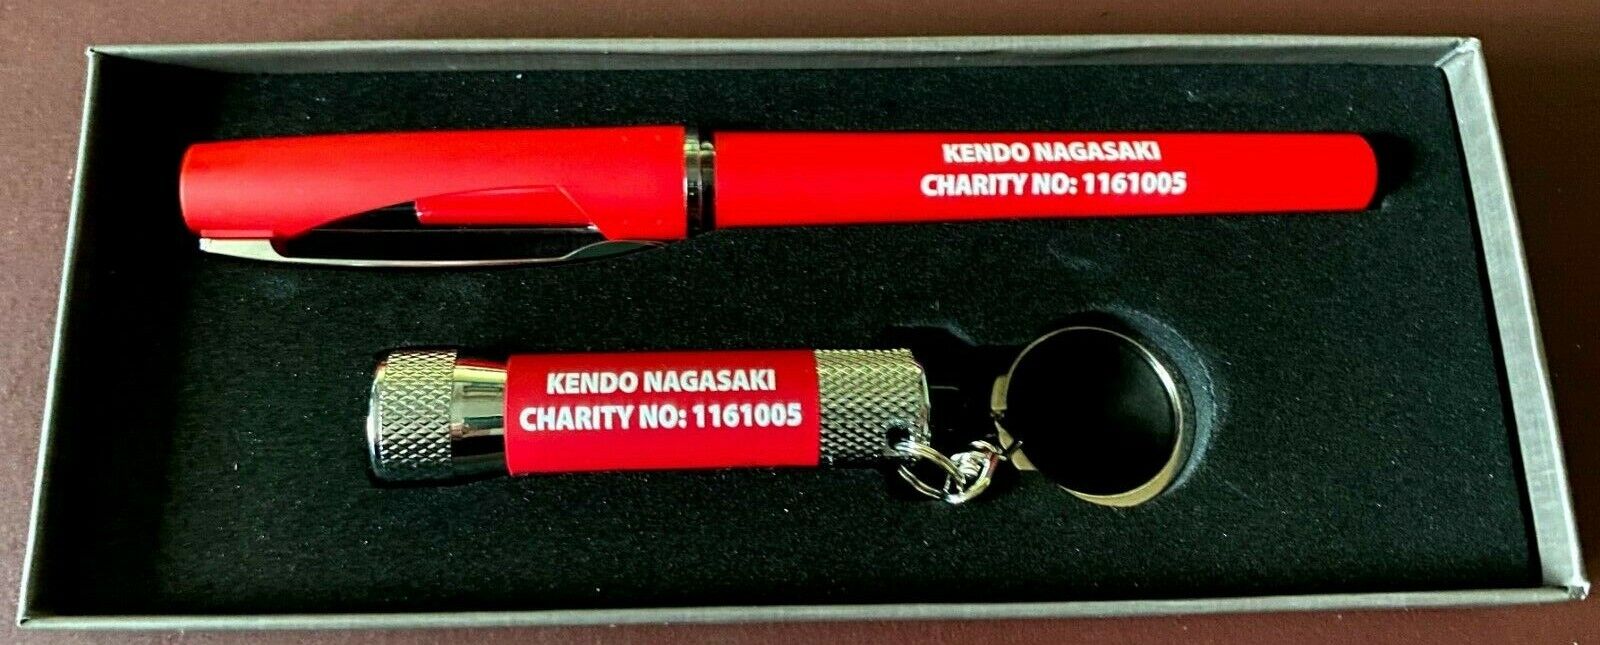 Limited Edition of 30 - Kendo Nagasaki Charity Pen and Torch. (S